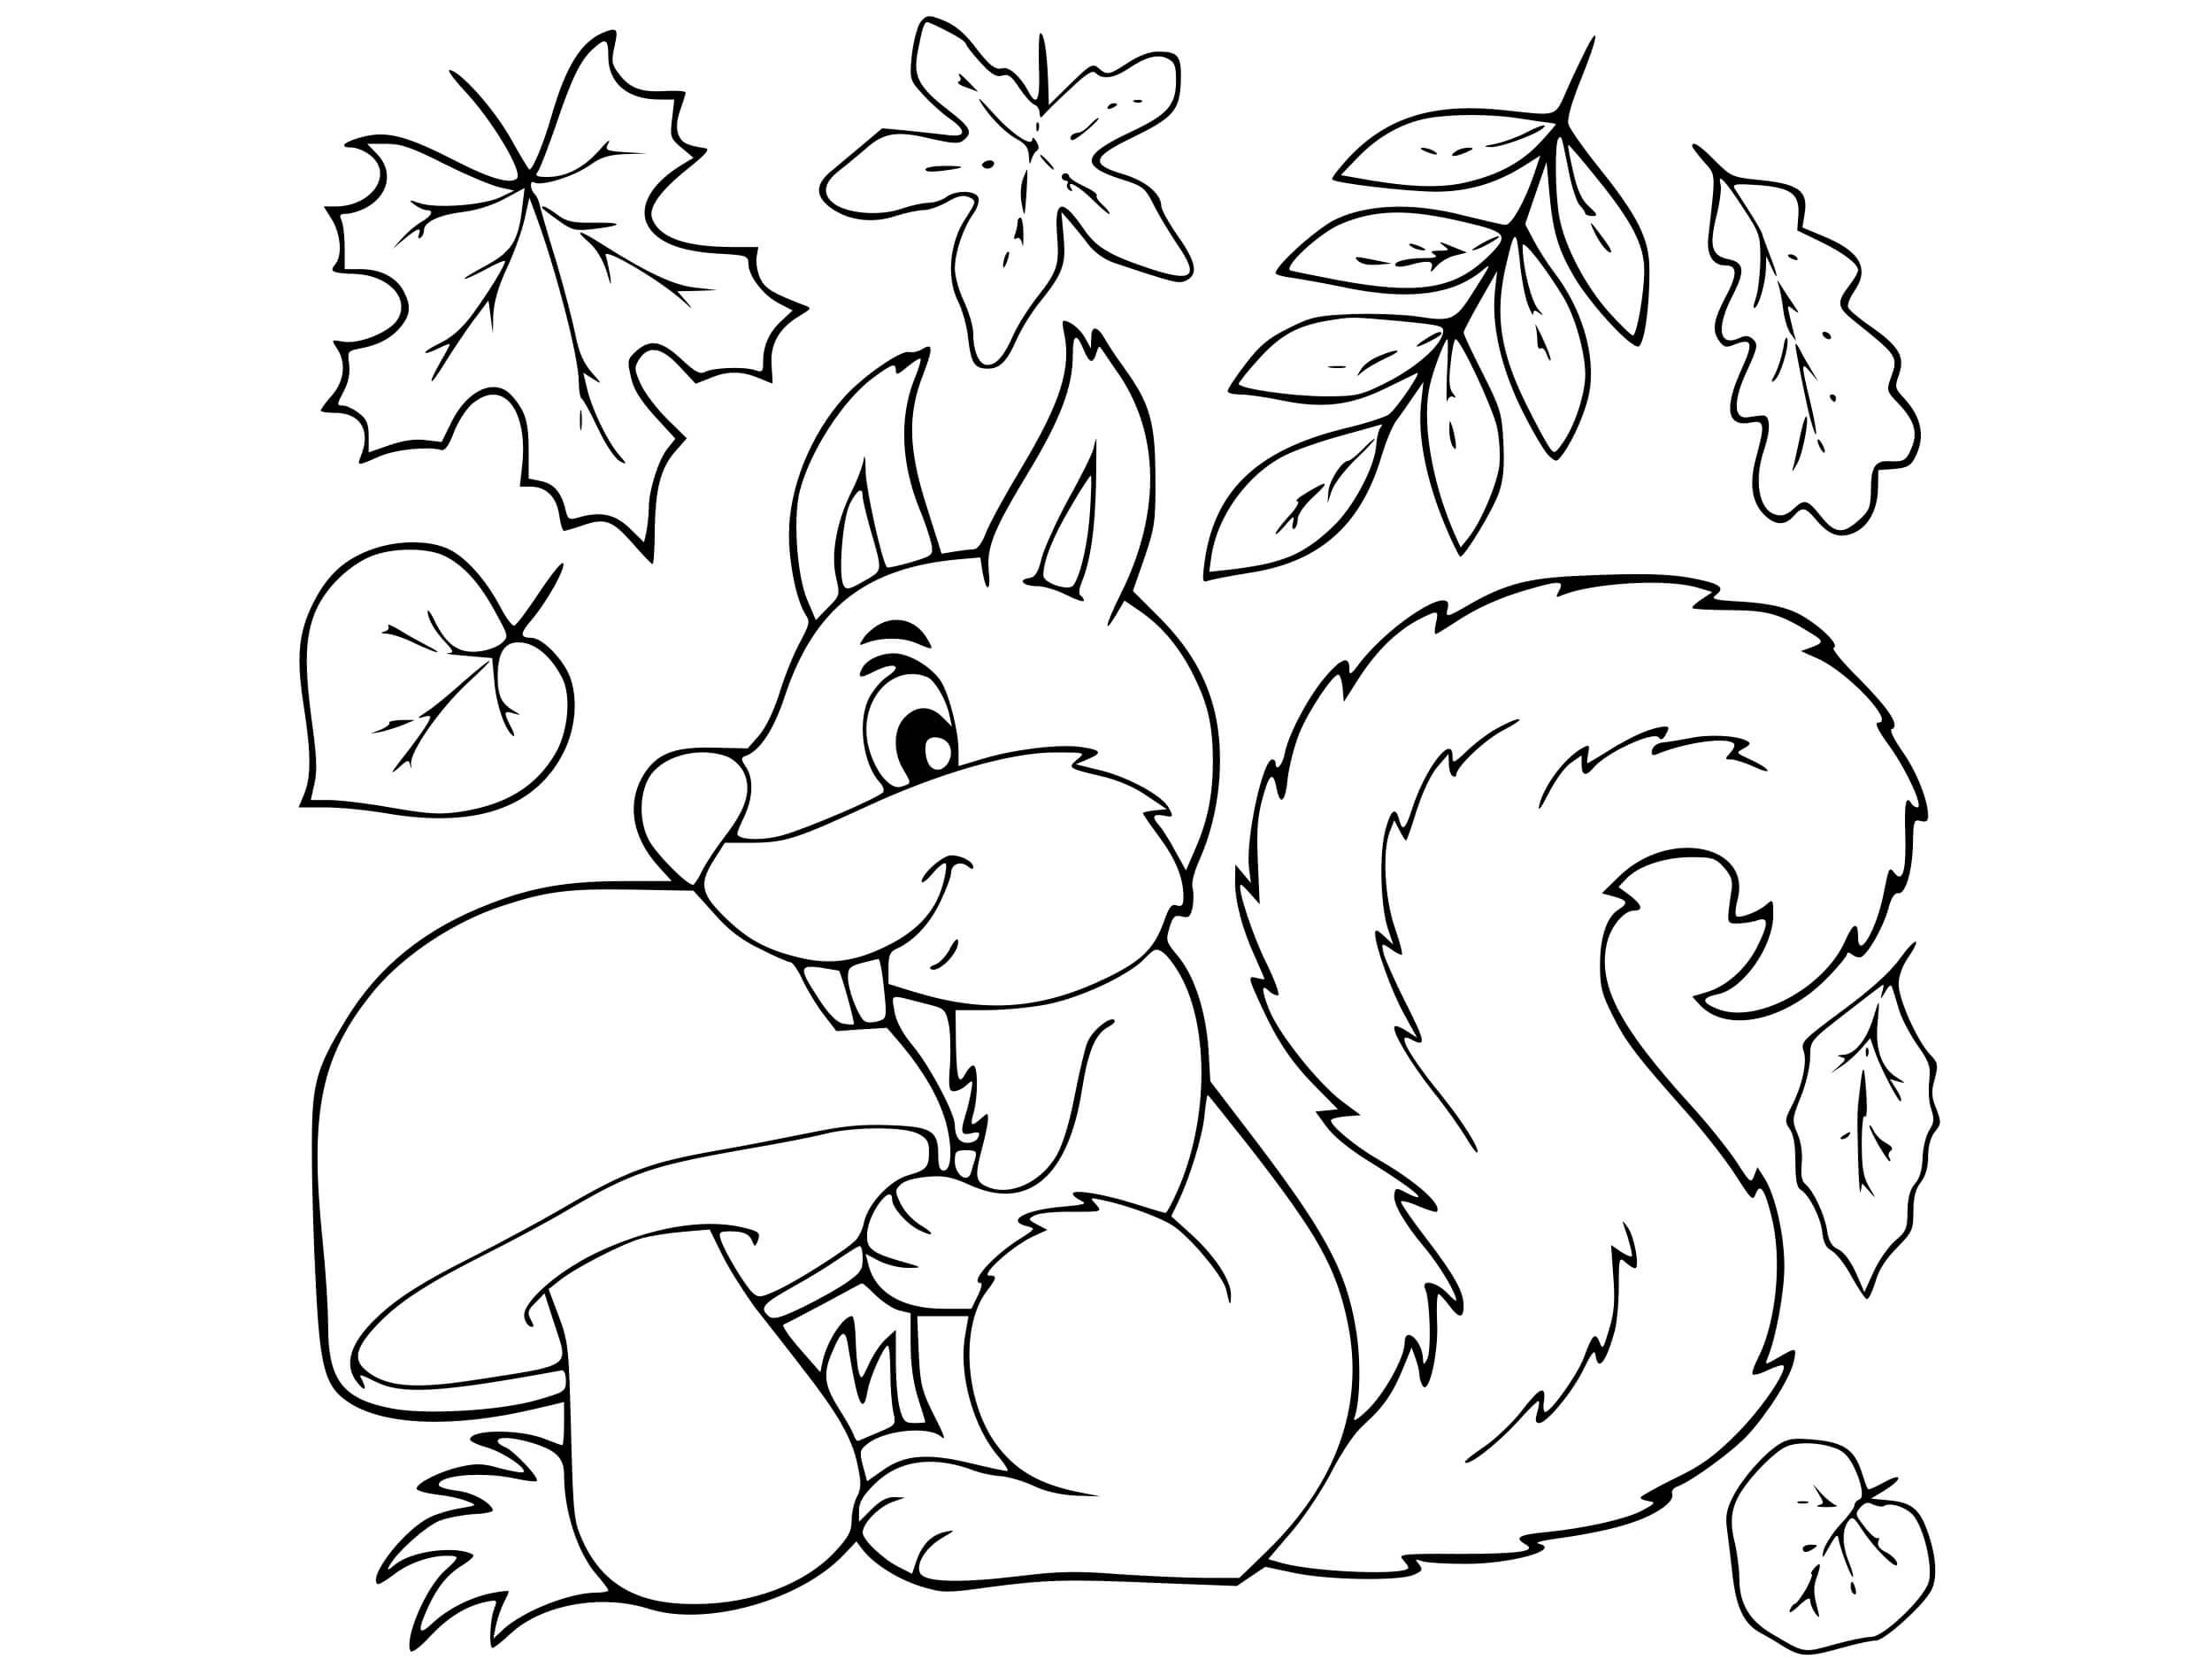 Autumn Leaves Squirrel Coloring Page